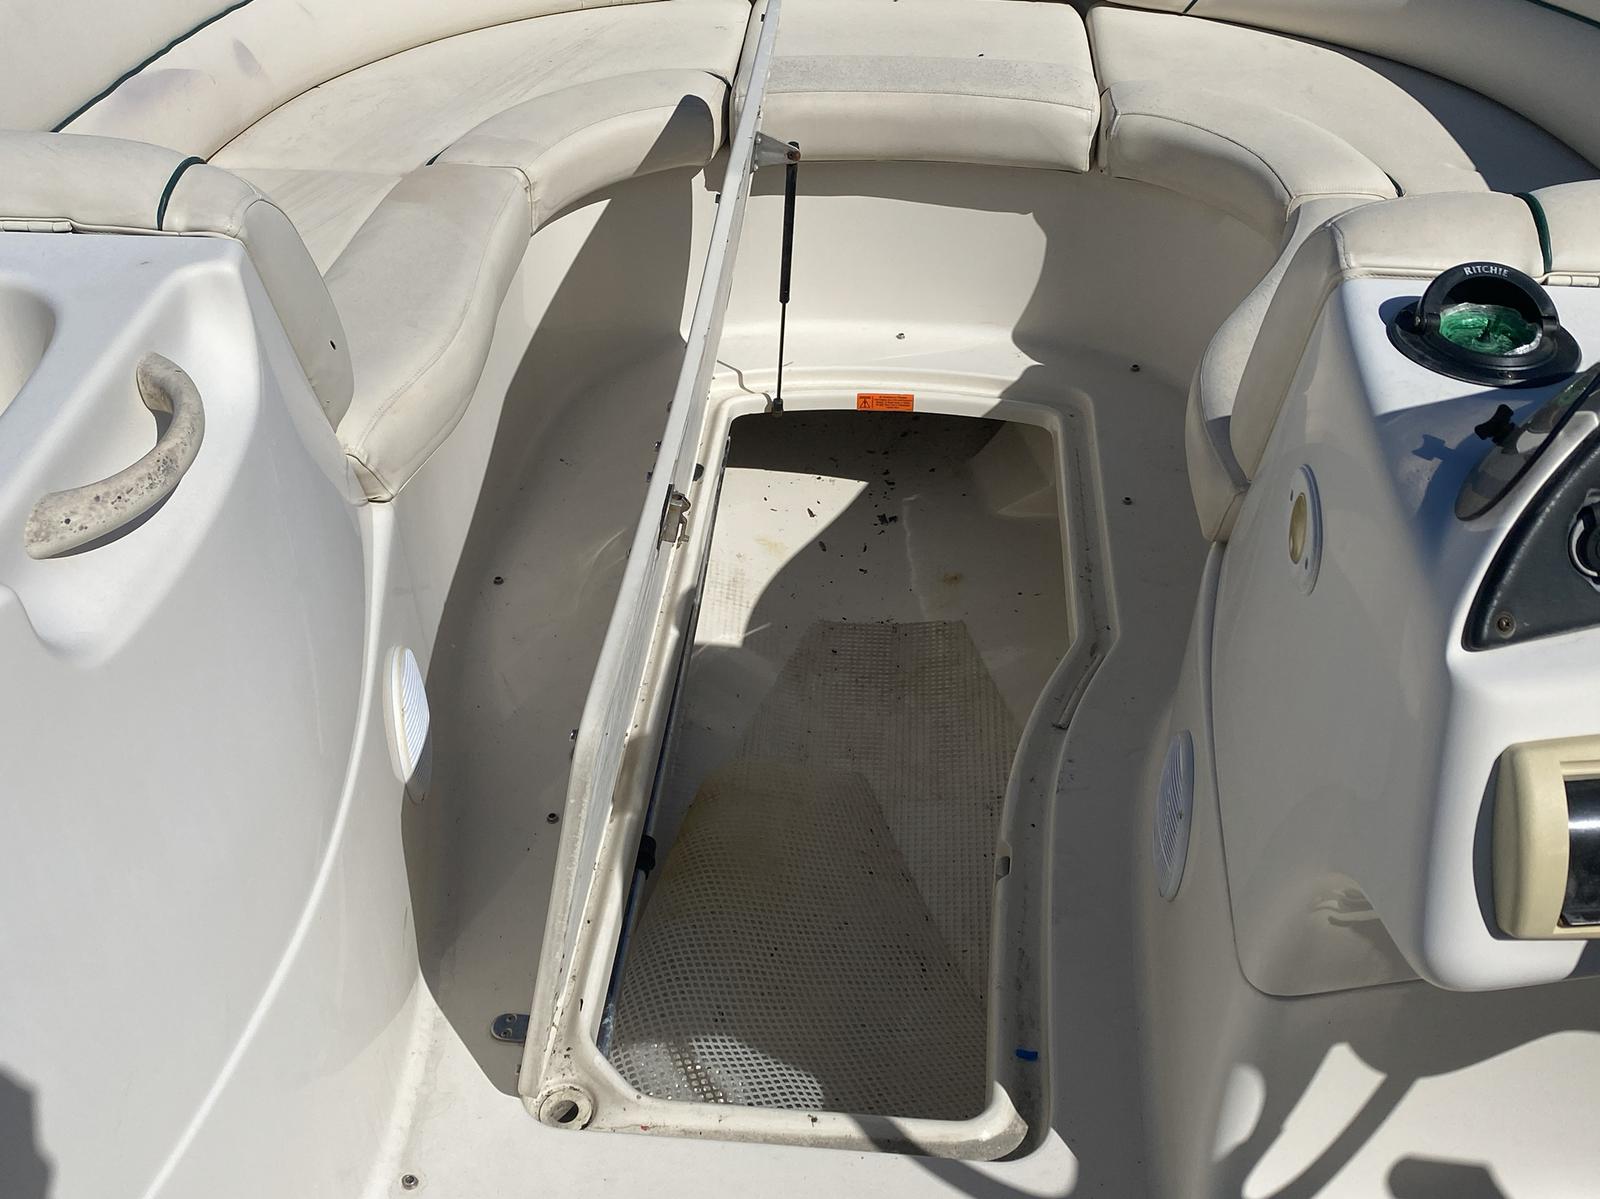 2005 Azure boat for sale, model of the boat is AZ210 & Image # 2 of 13